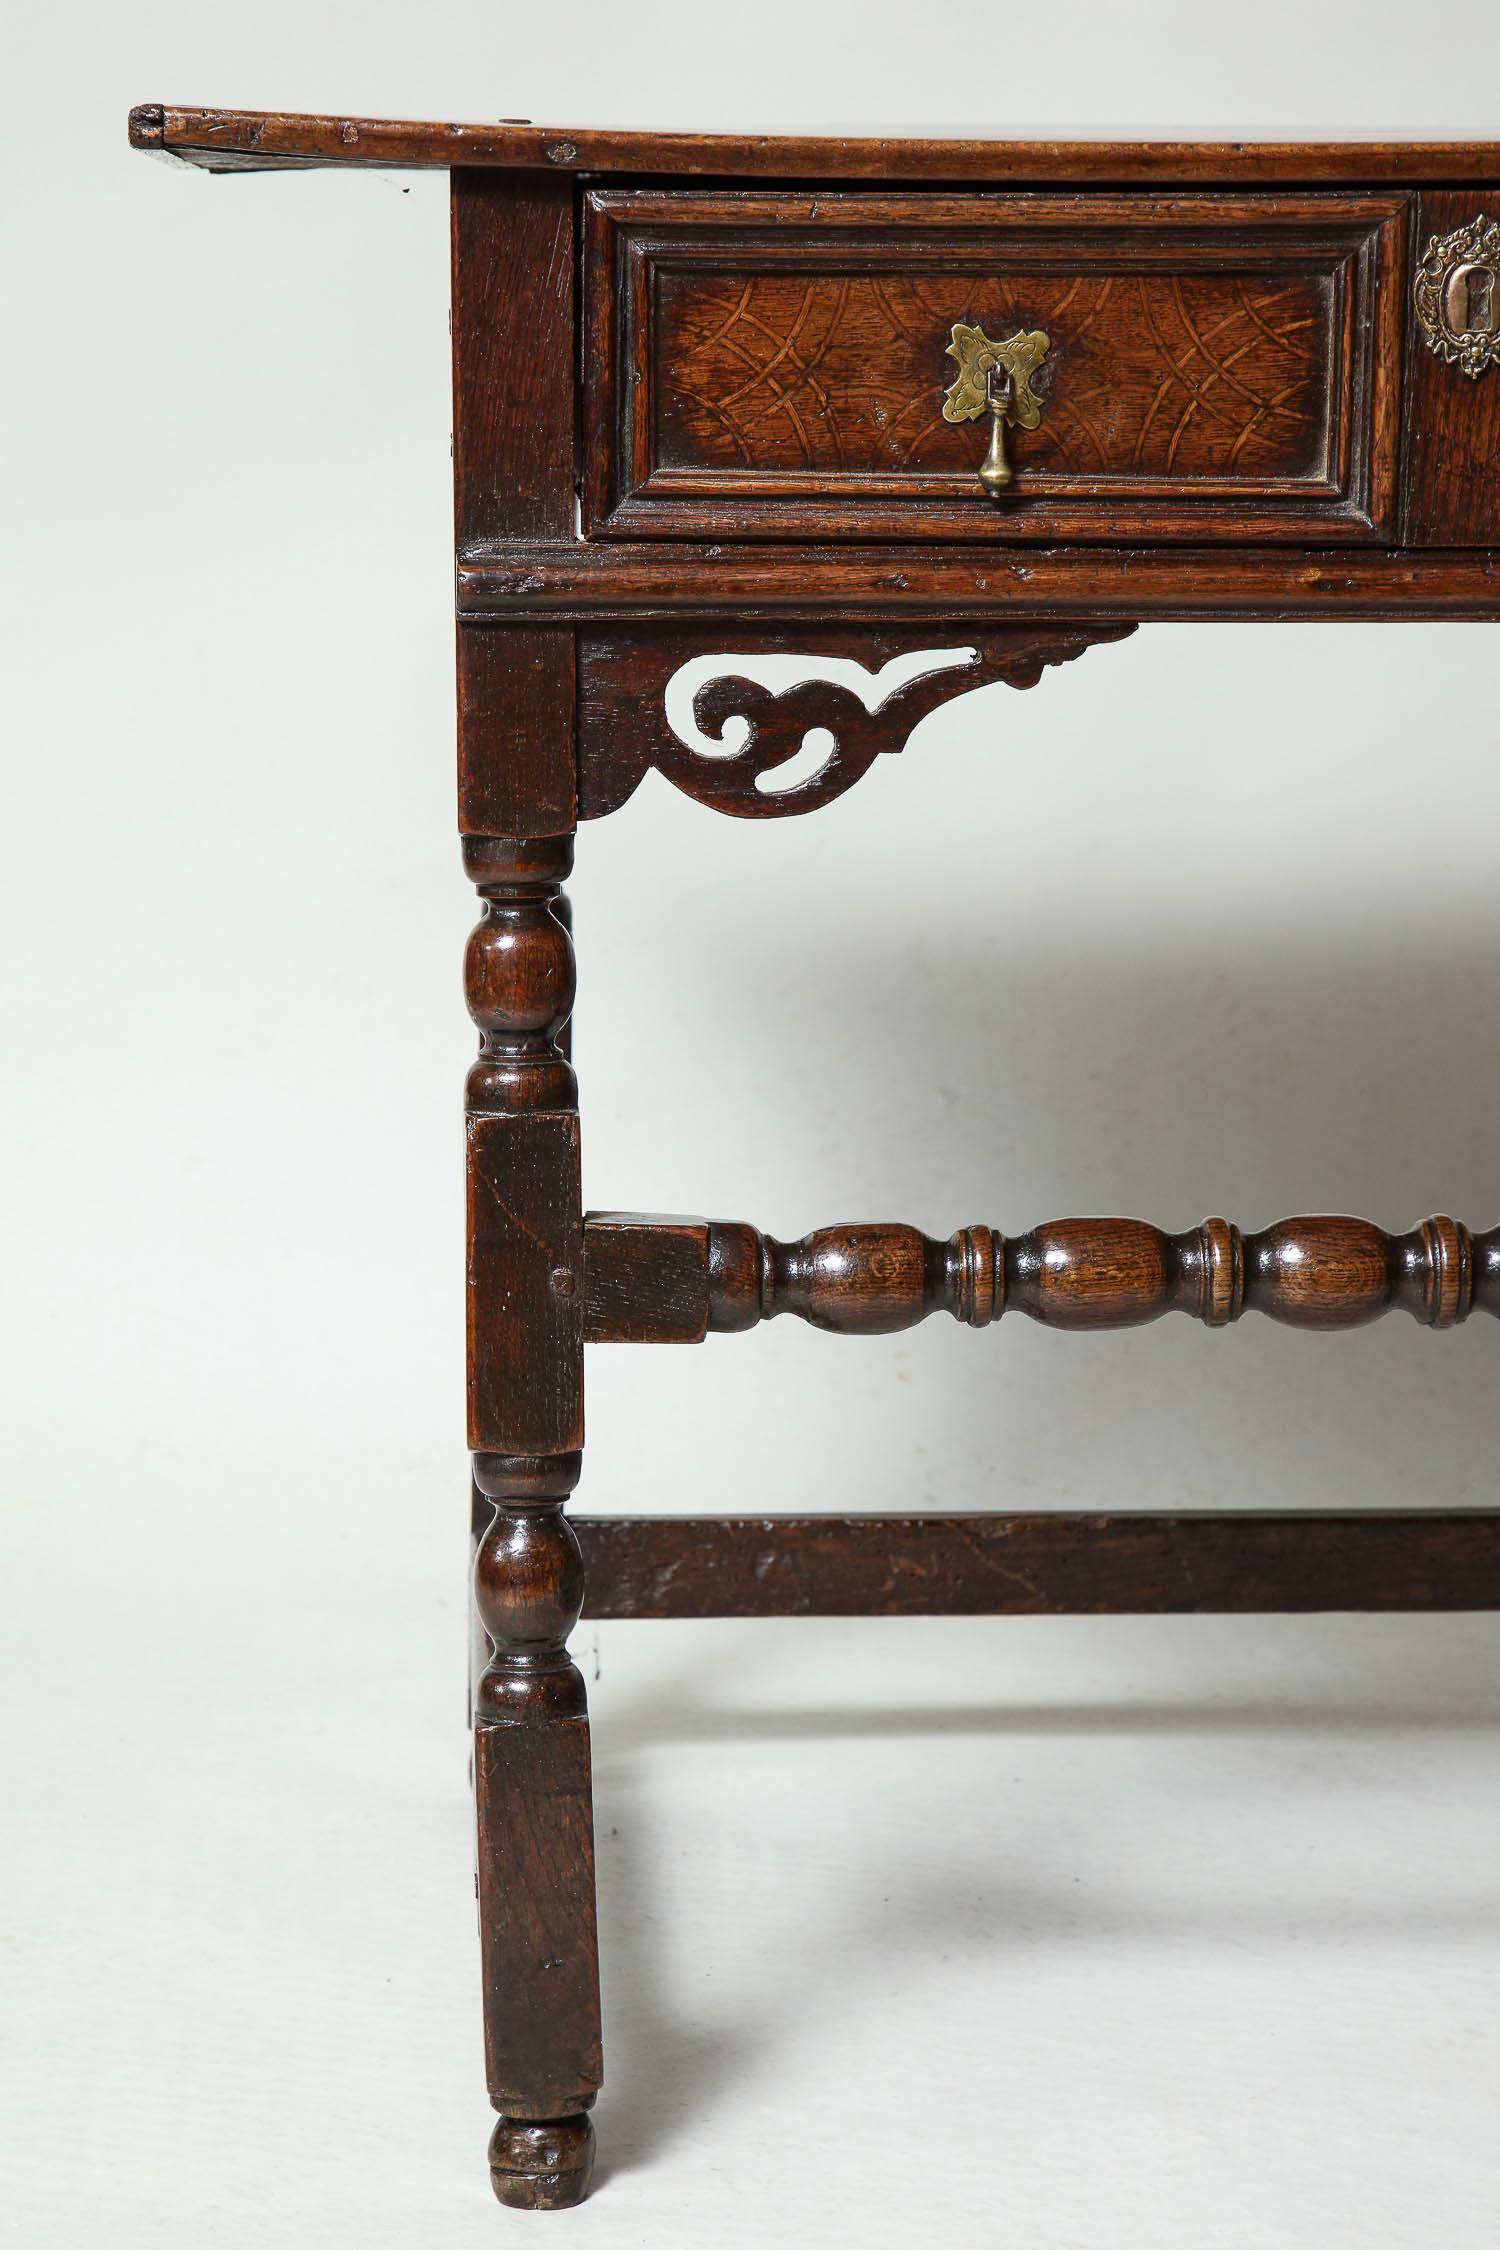 Fine Charles II period side table, the two plank top with breadboard ends, over geometric molded single drawer with inlaid semicircle panels over well-turned legs having pierced and scrolled spandrels and joined by high turned stretcher, the whole